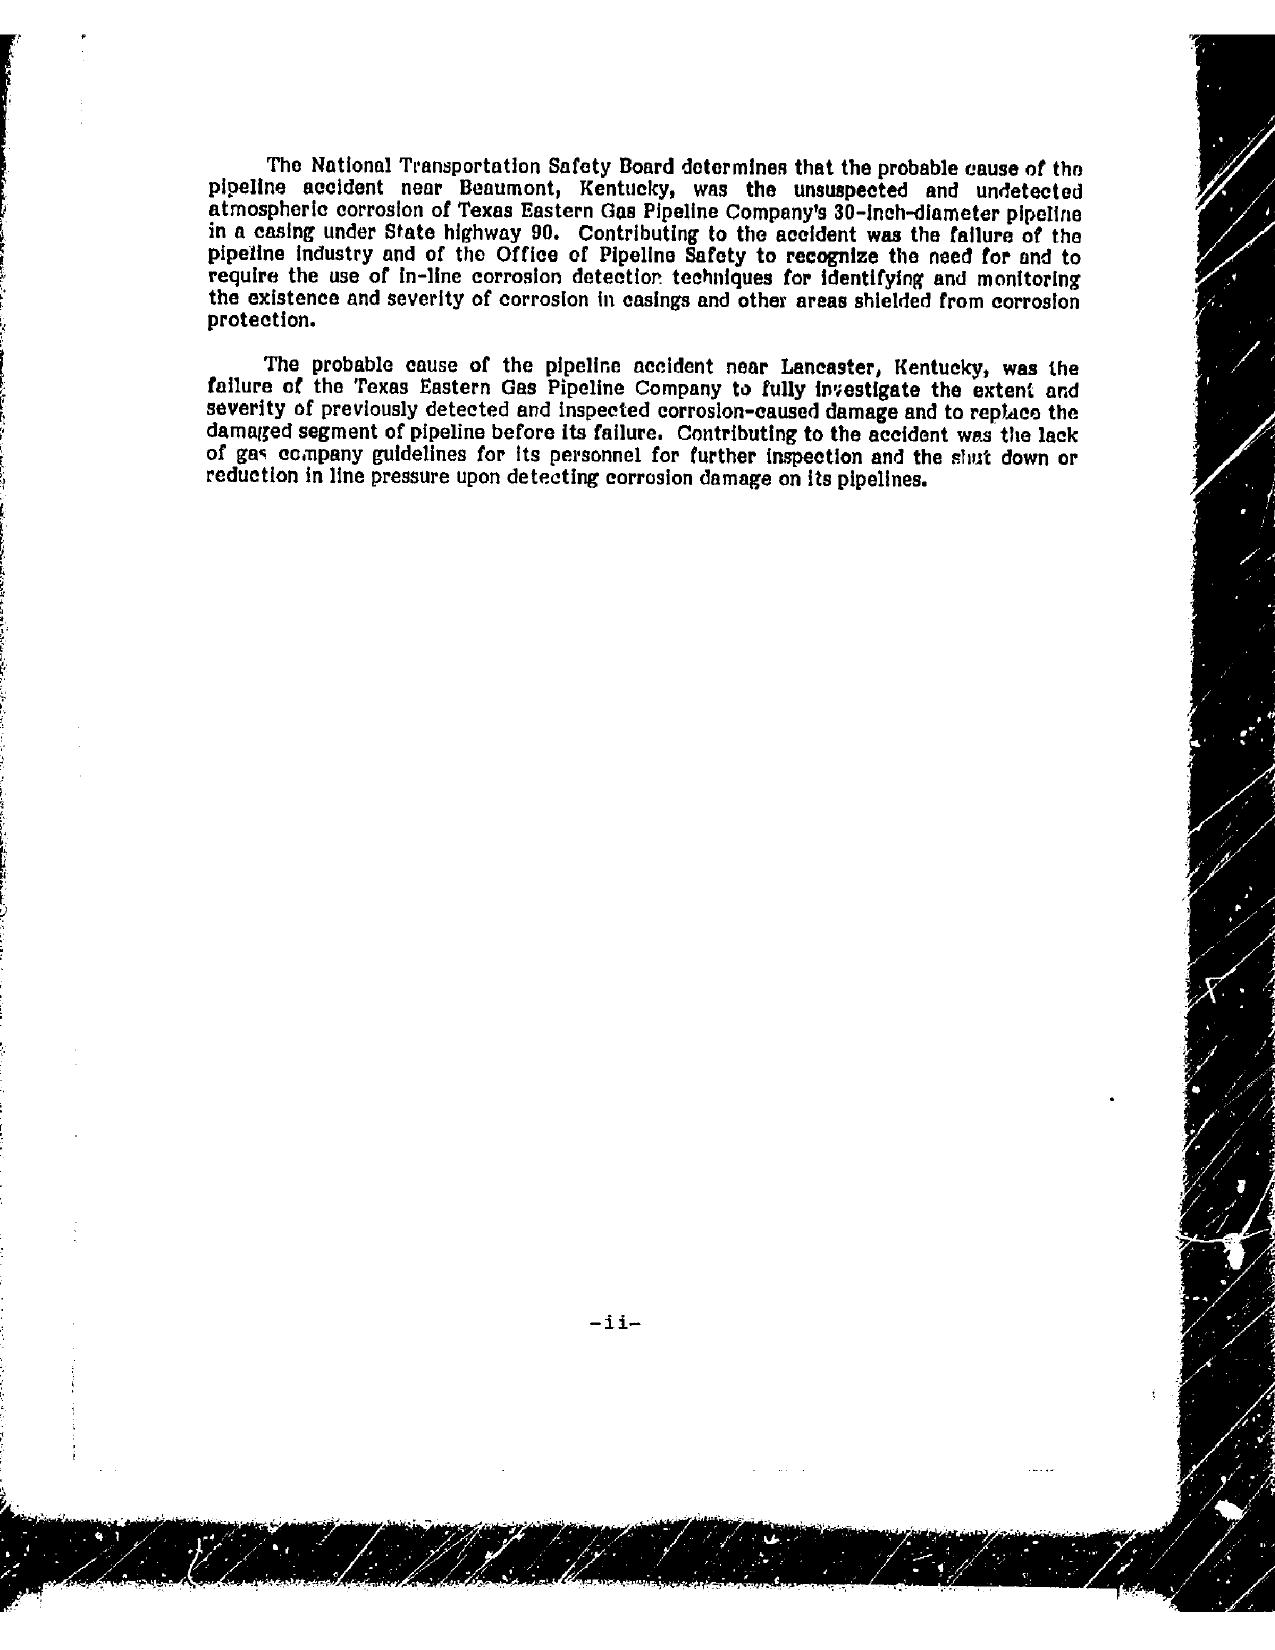 1275x1650 Probable cause, in Texas Eastern Gas Pipeline Company Ruptures and Fires, by John S. Quarterman, for SpectraBusters.org, 18 February 1987